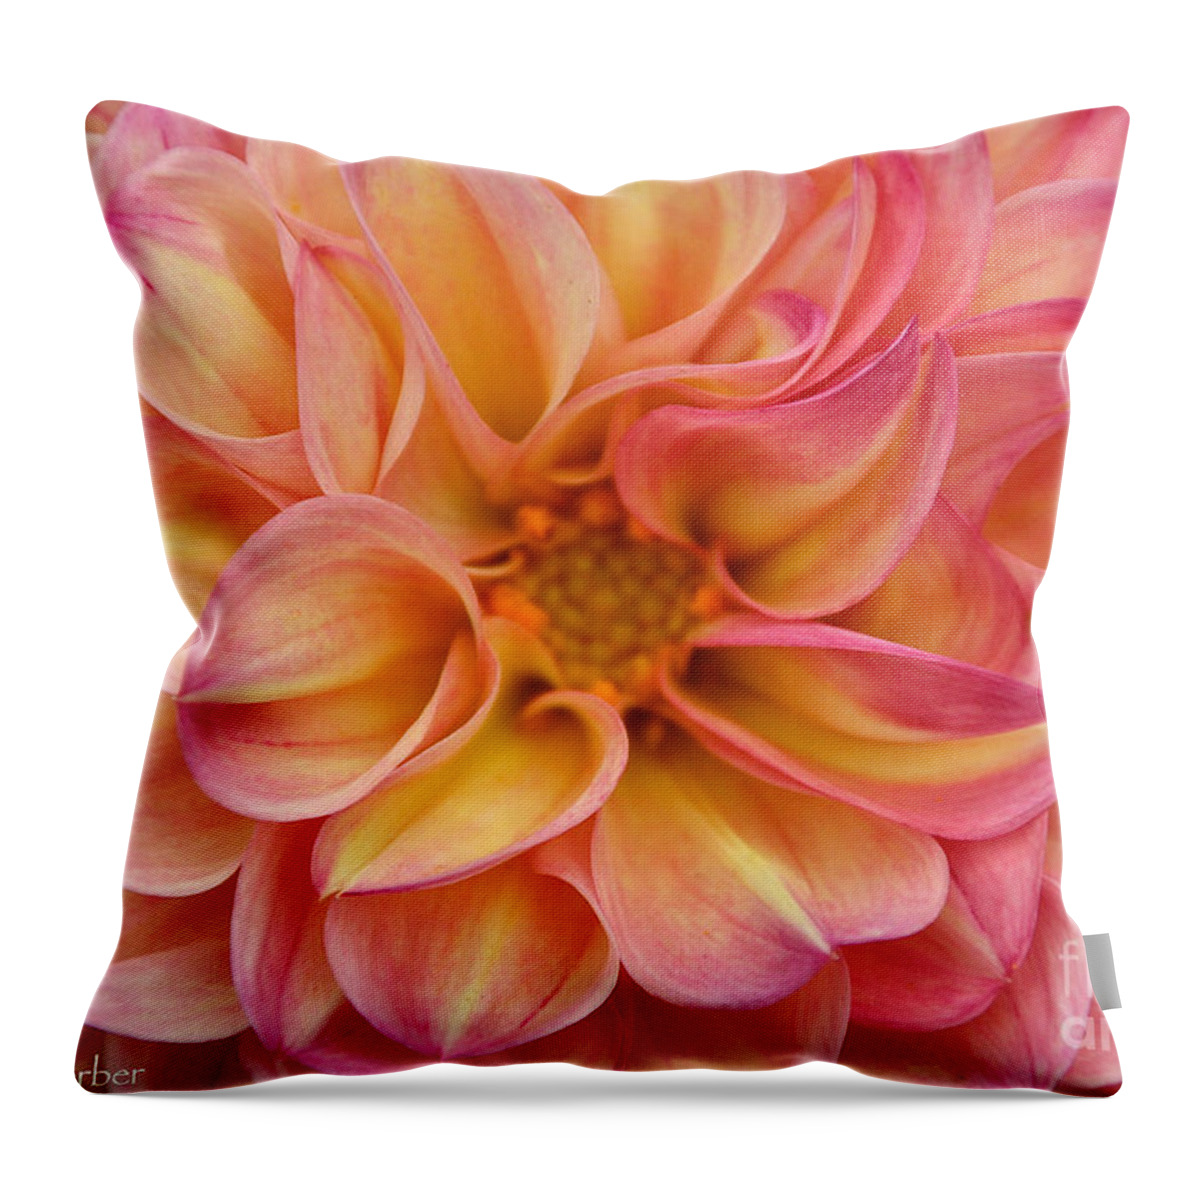 Flower Throw Pillow featuring the photograph Pure Pastels by Susan Herber